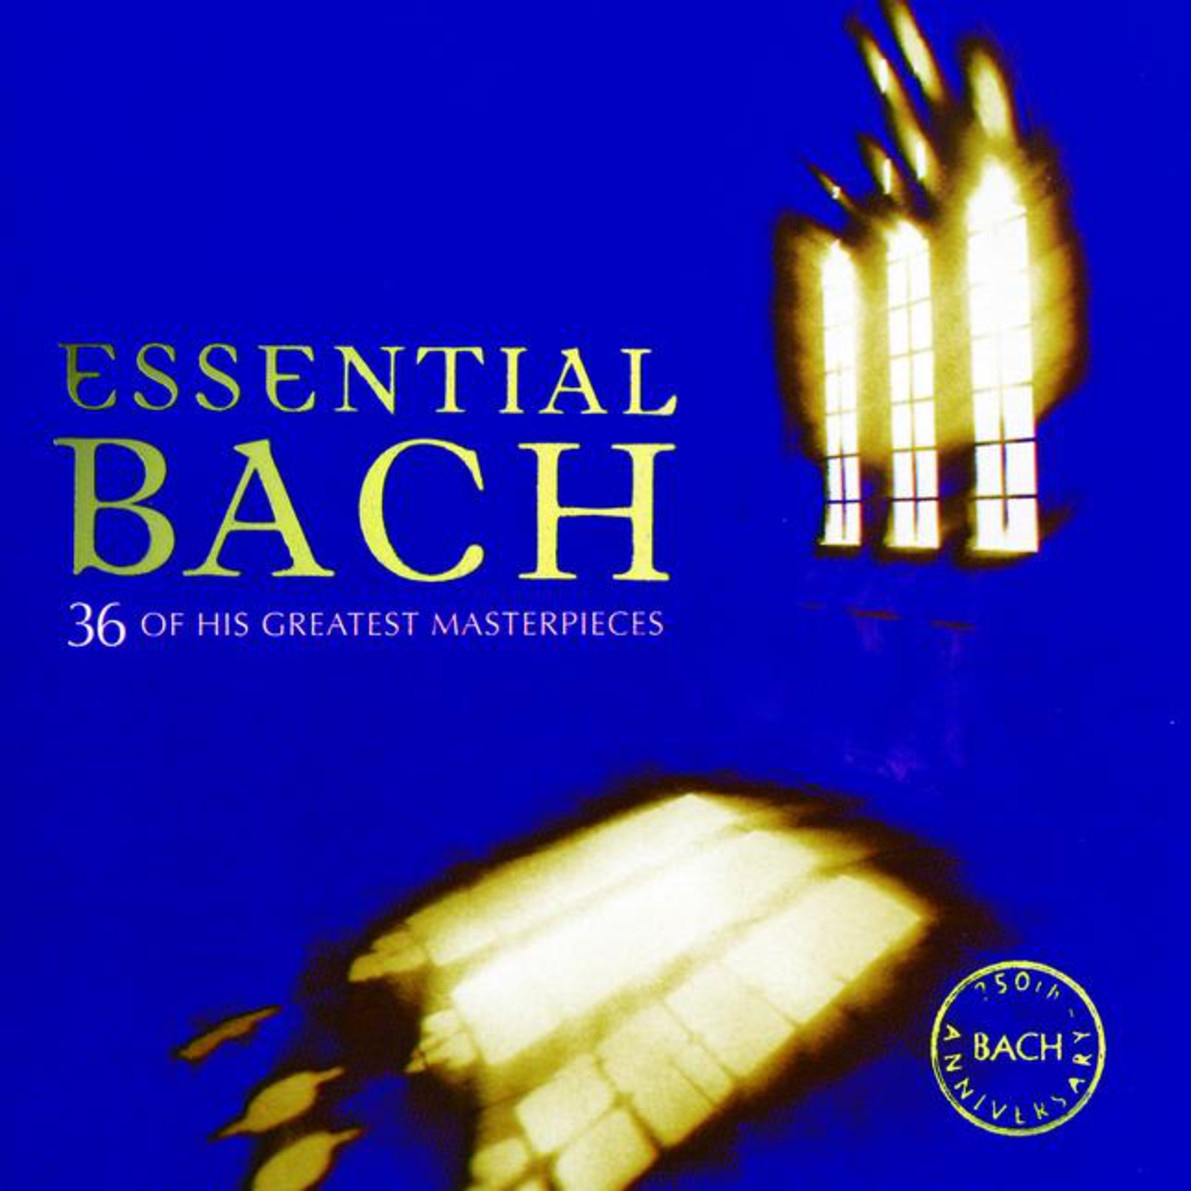 Air 'on the G string' from Orchestral Suite No. 3 in D BWV1068 (1989 Digital Remaster)